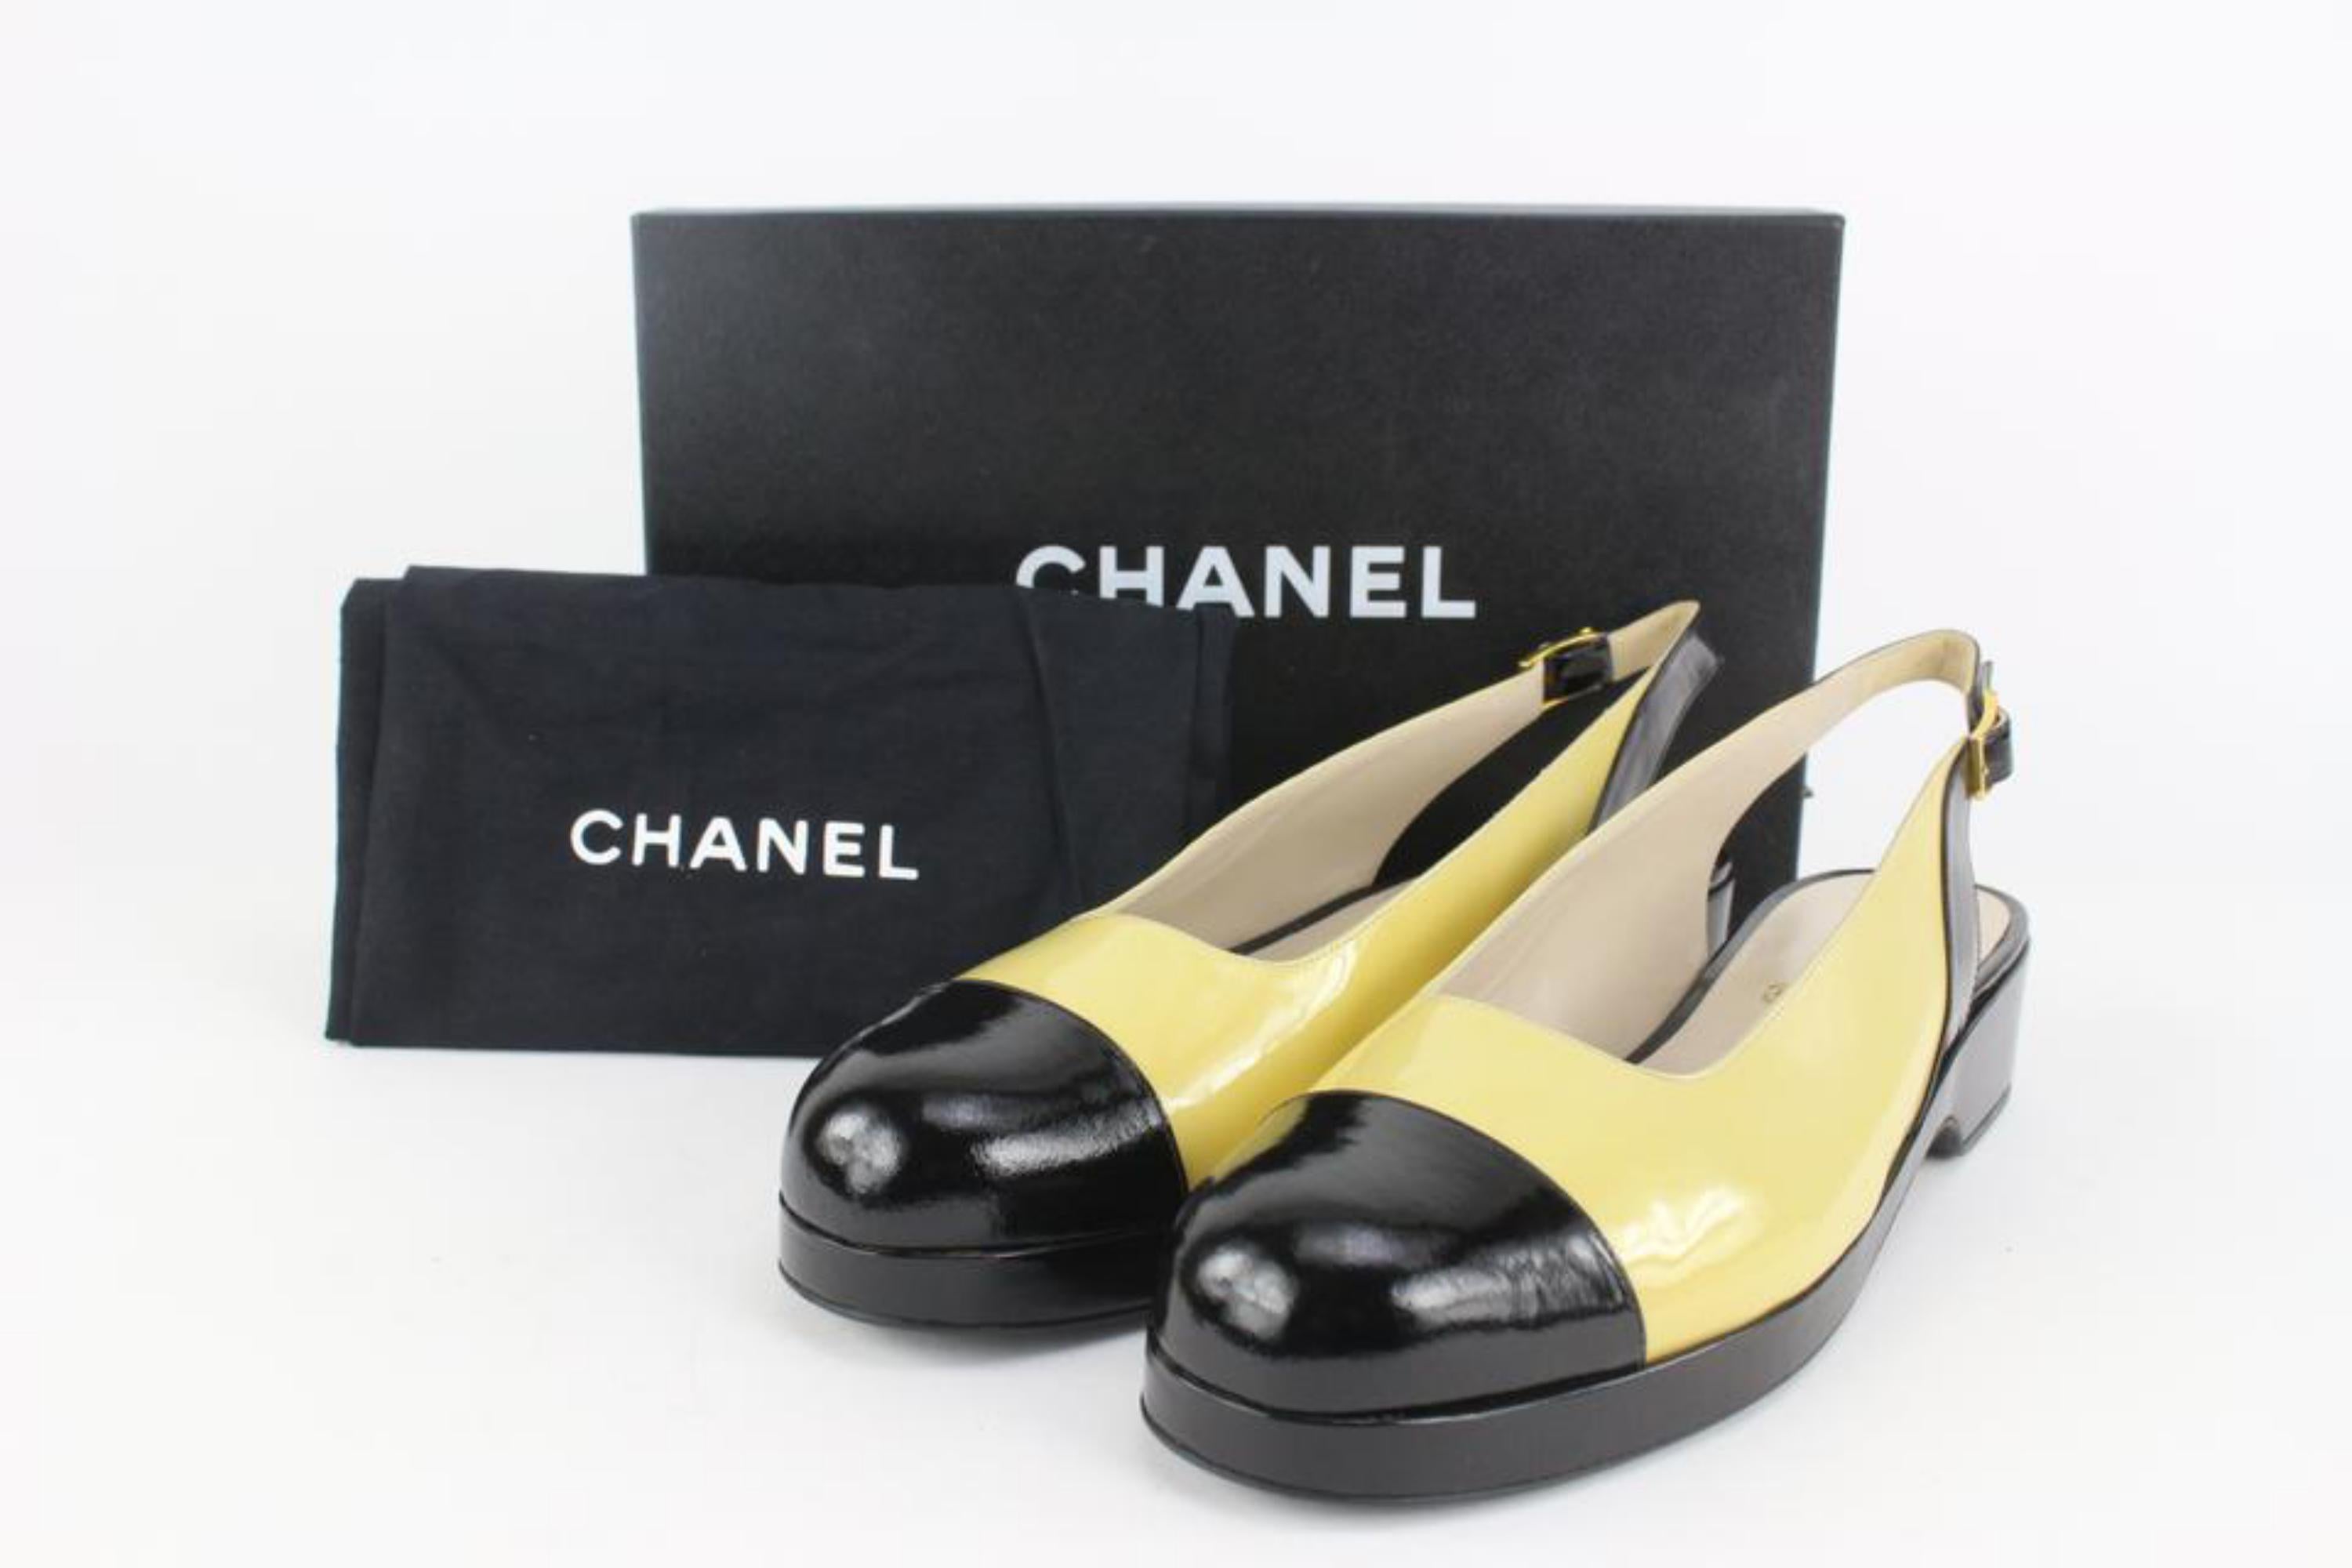 Chanel Ultra Rare 1998 98C New in Box Sz 41 Two Tone Kitten Heels 127c32
Made In: Italy
Measurements: Length:  10.75